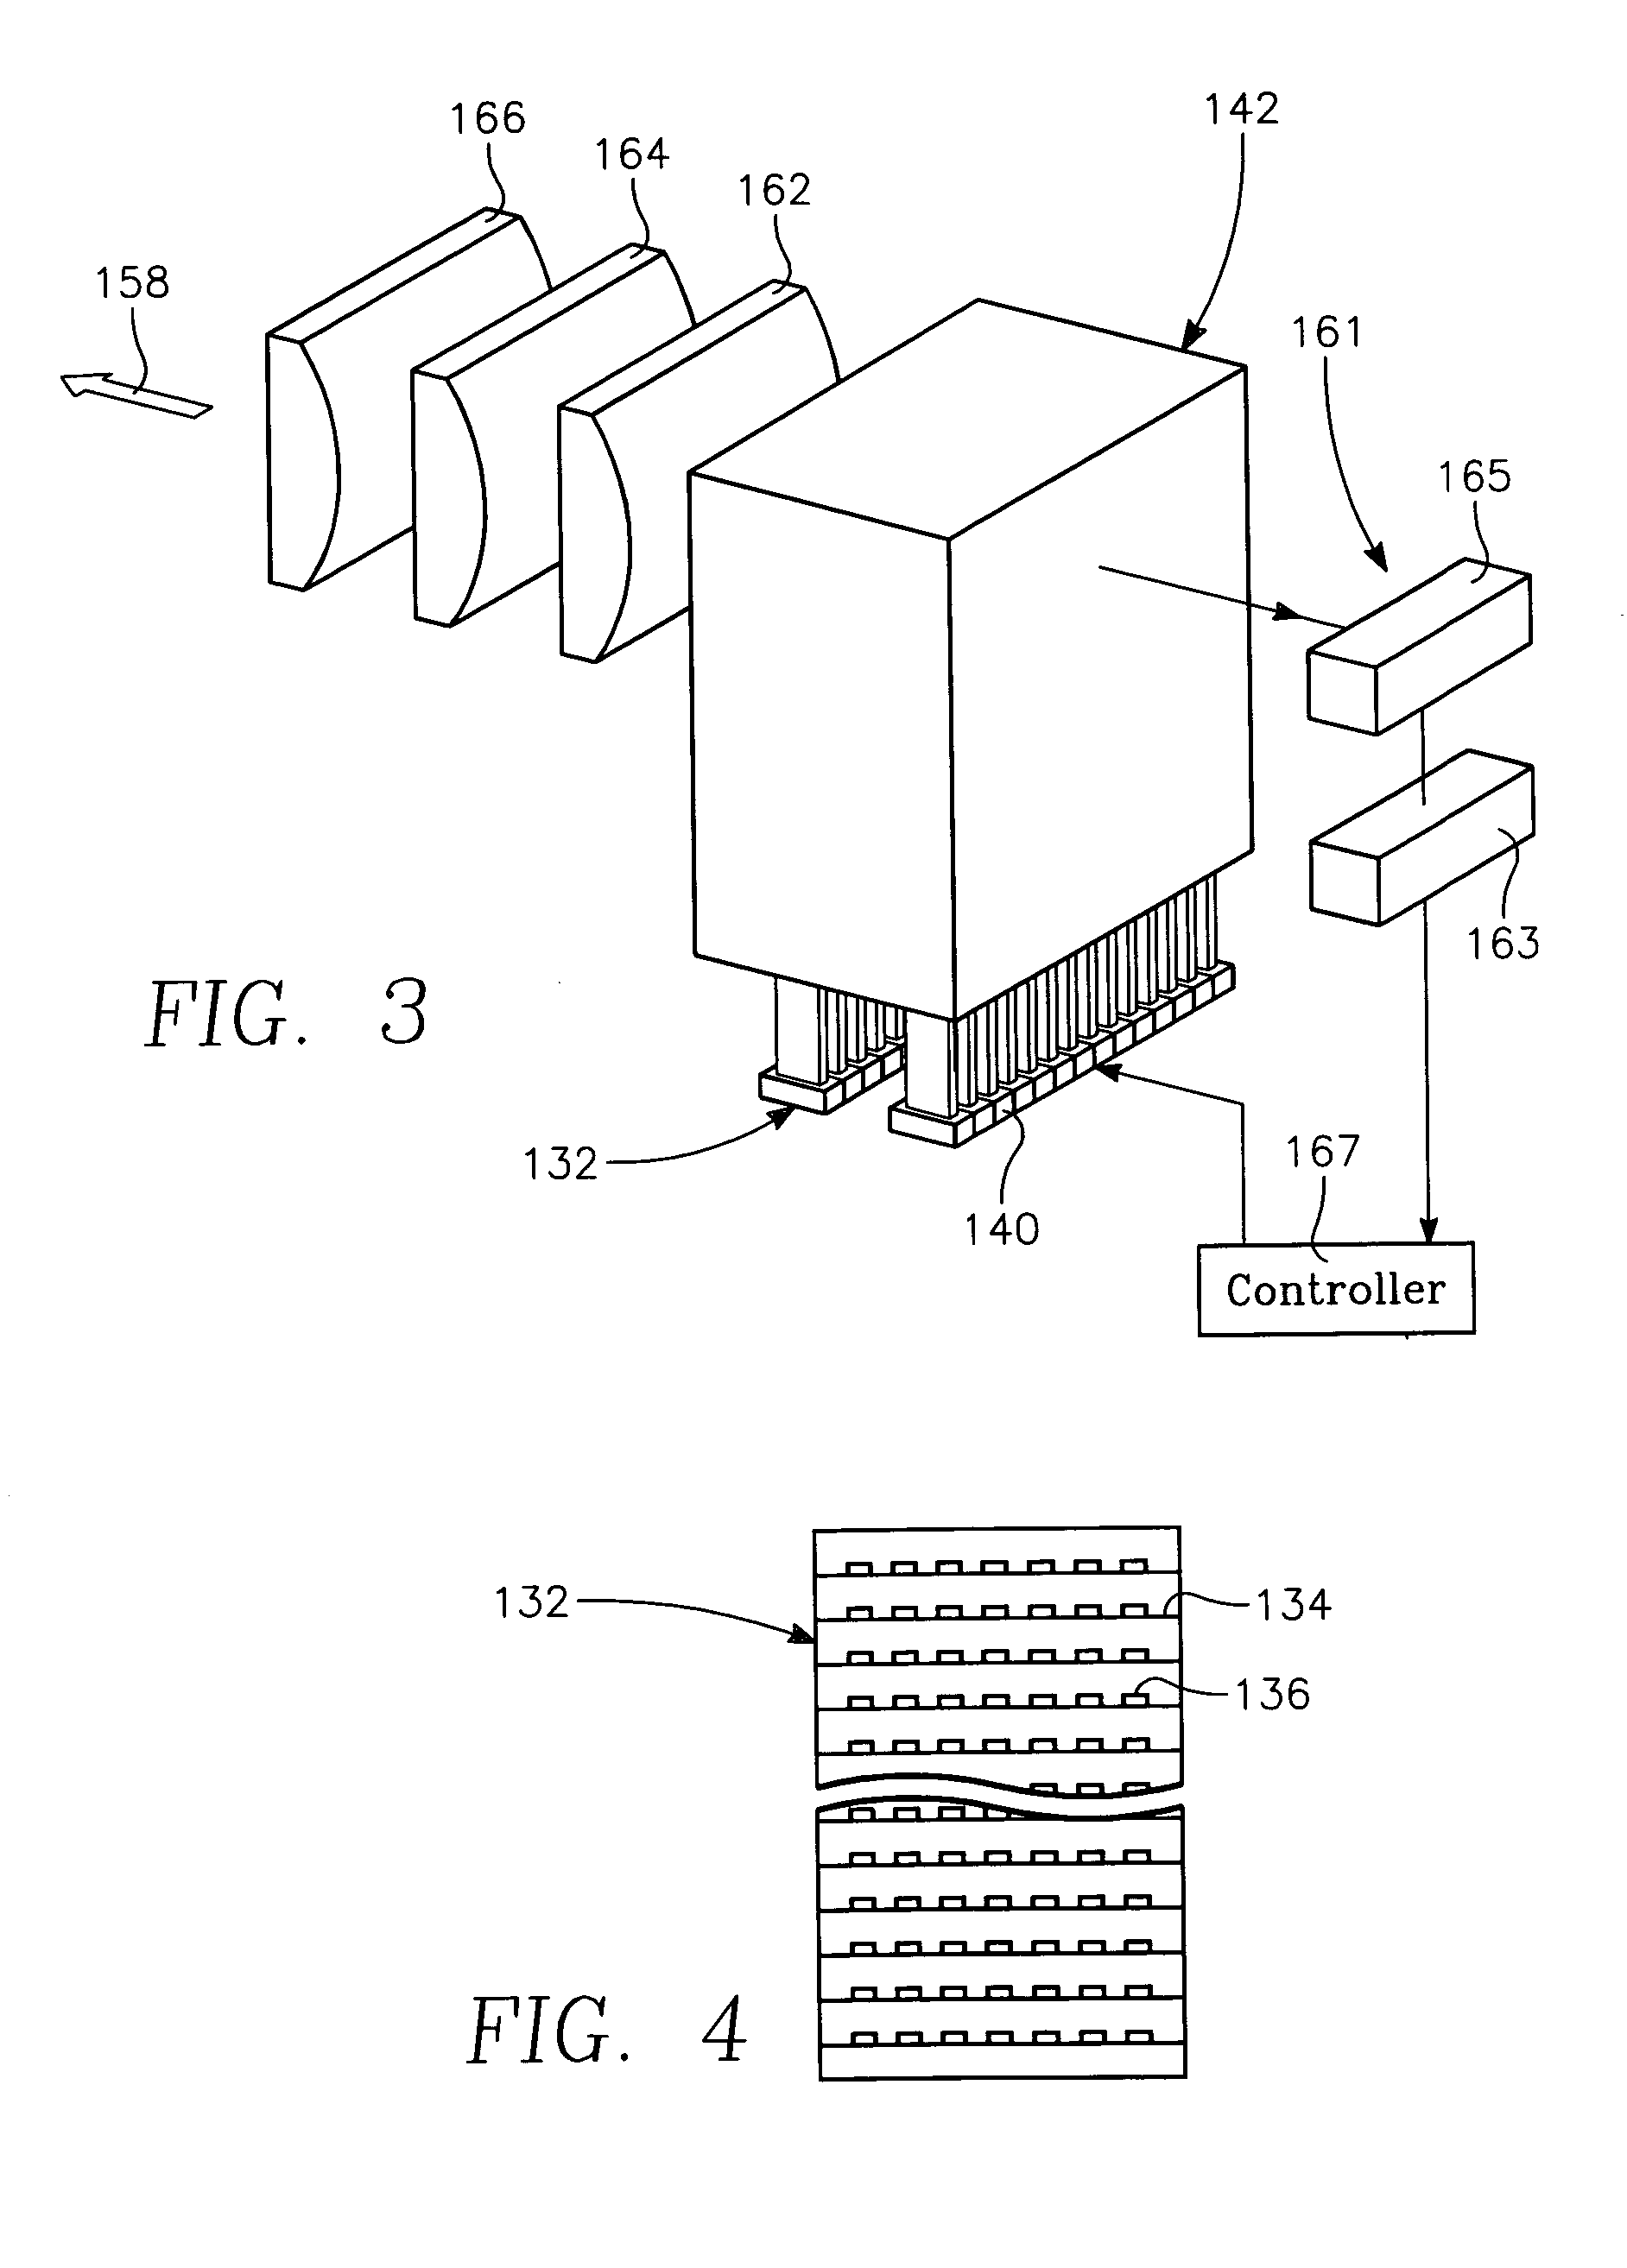 Semiconductor substrate process using an optically writable carbon-containing mask